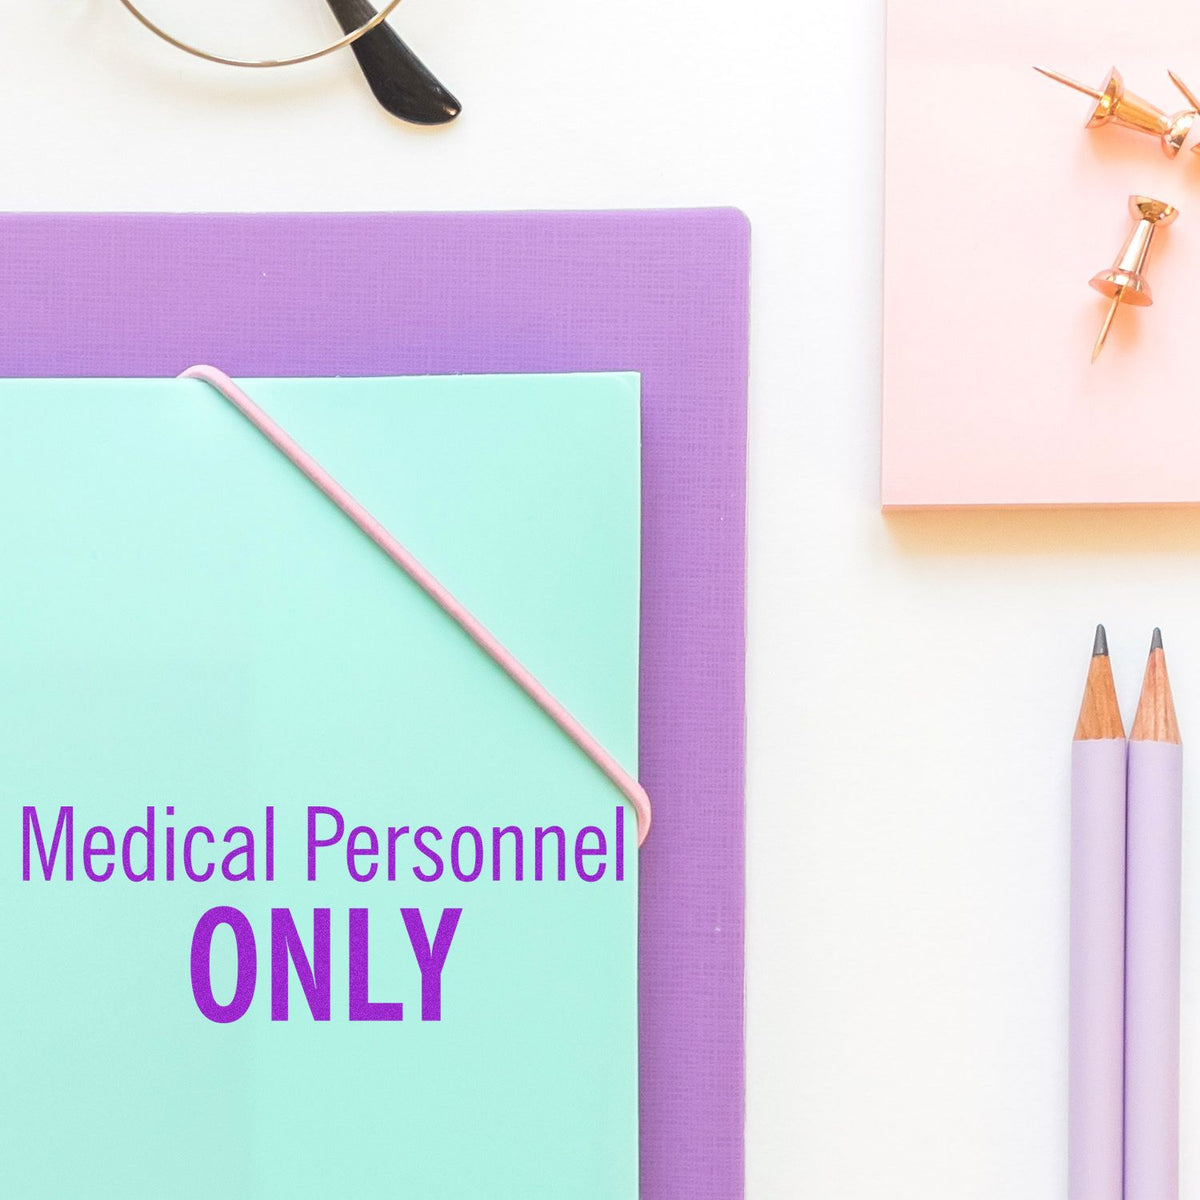 Medical Personnel Only Rubber Stamp In Use